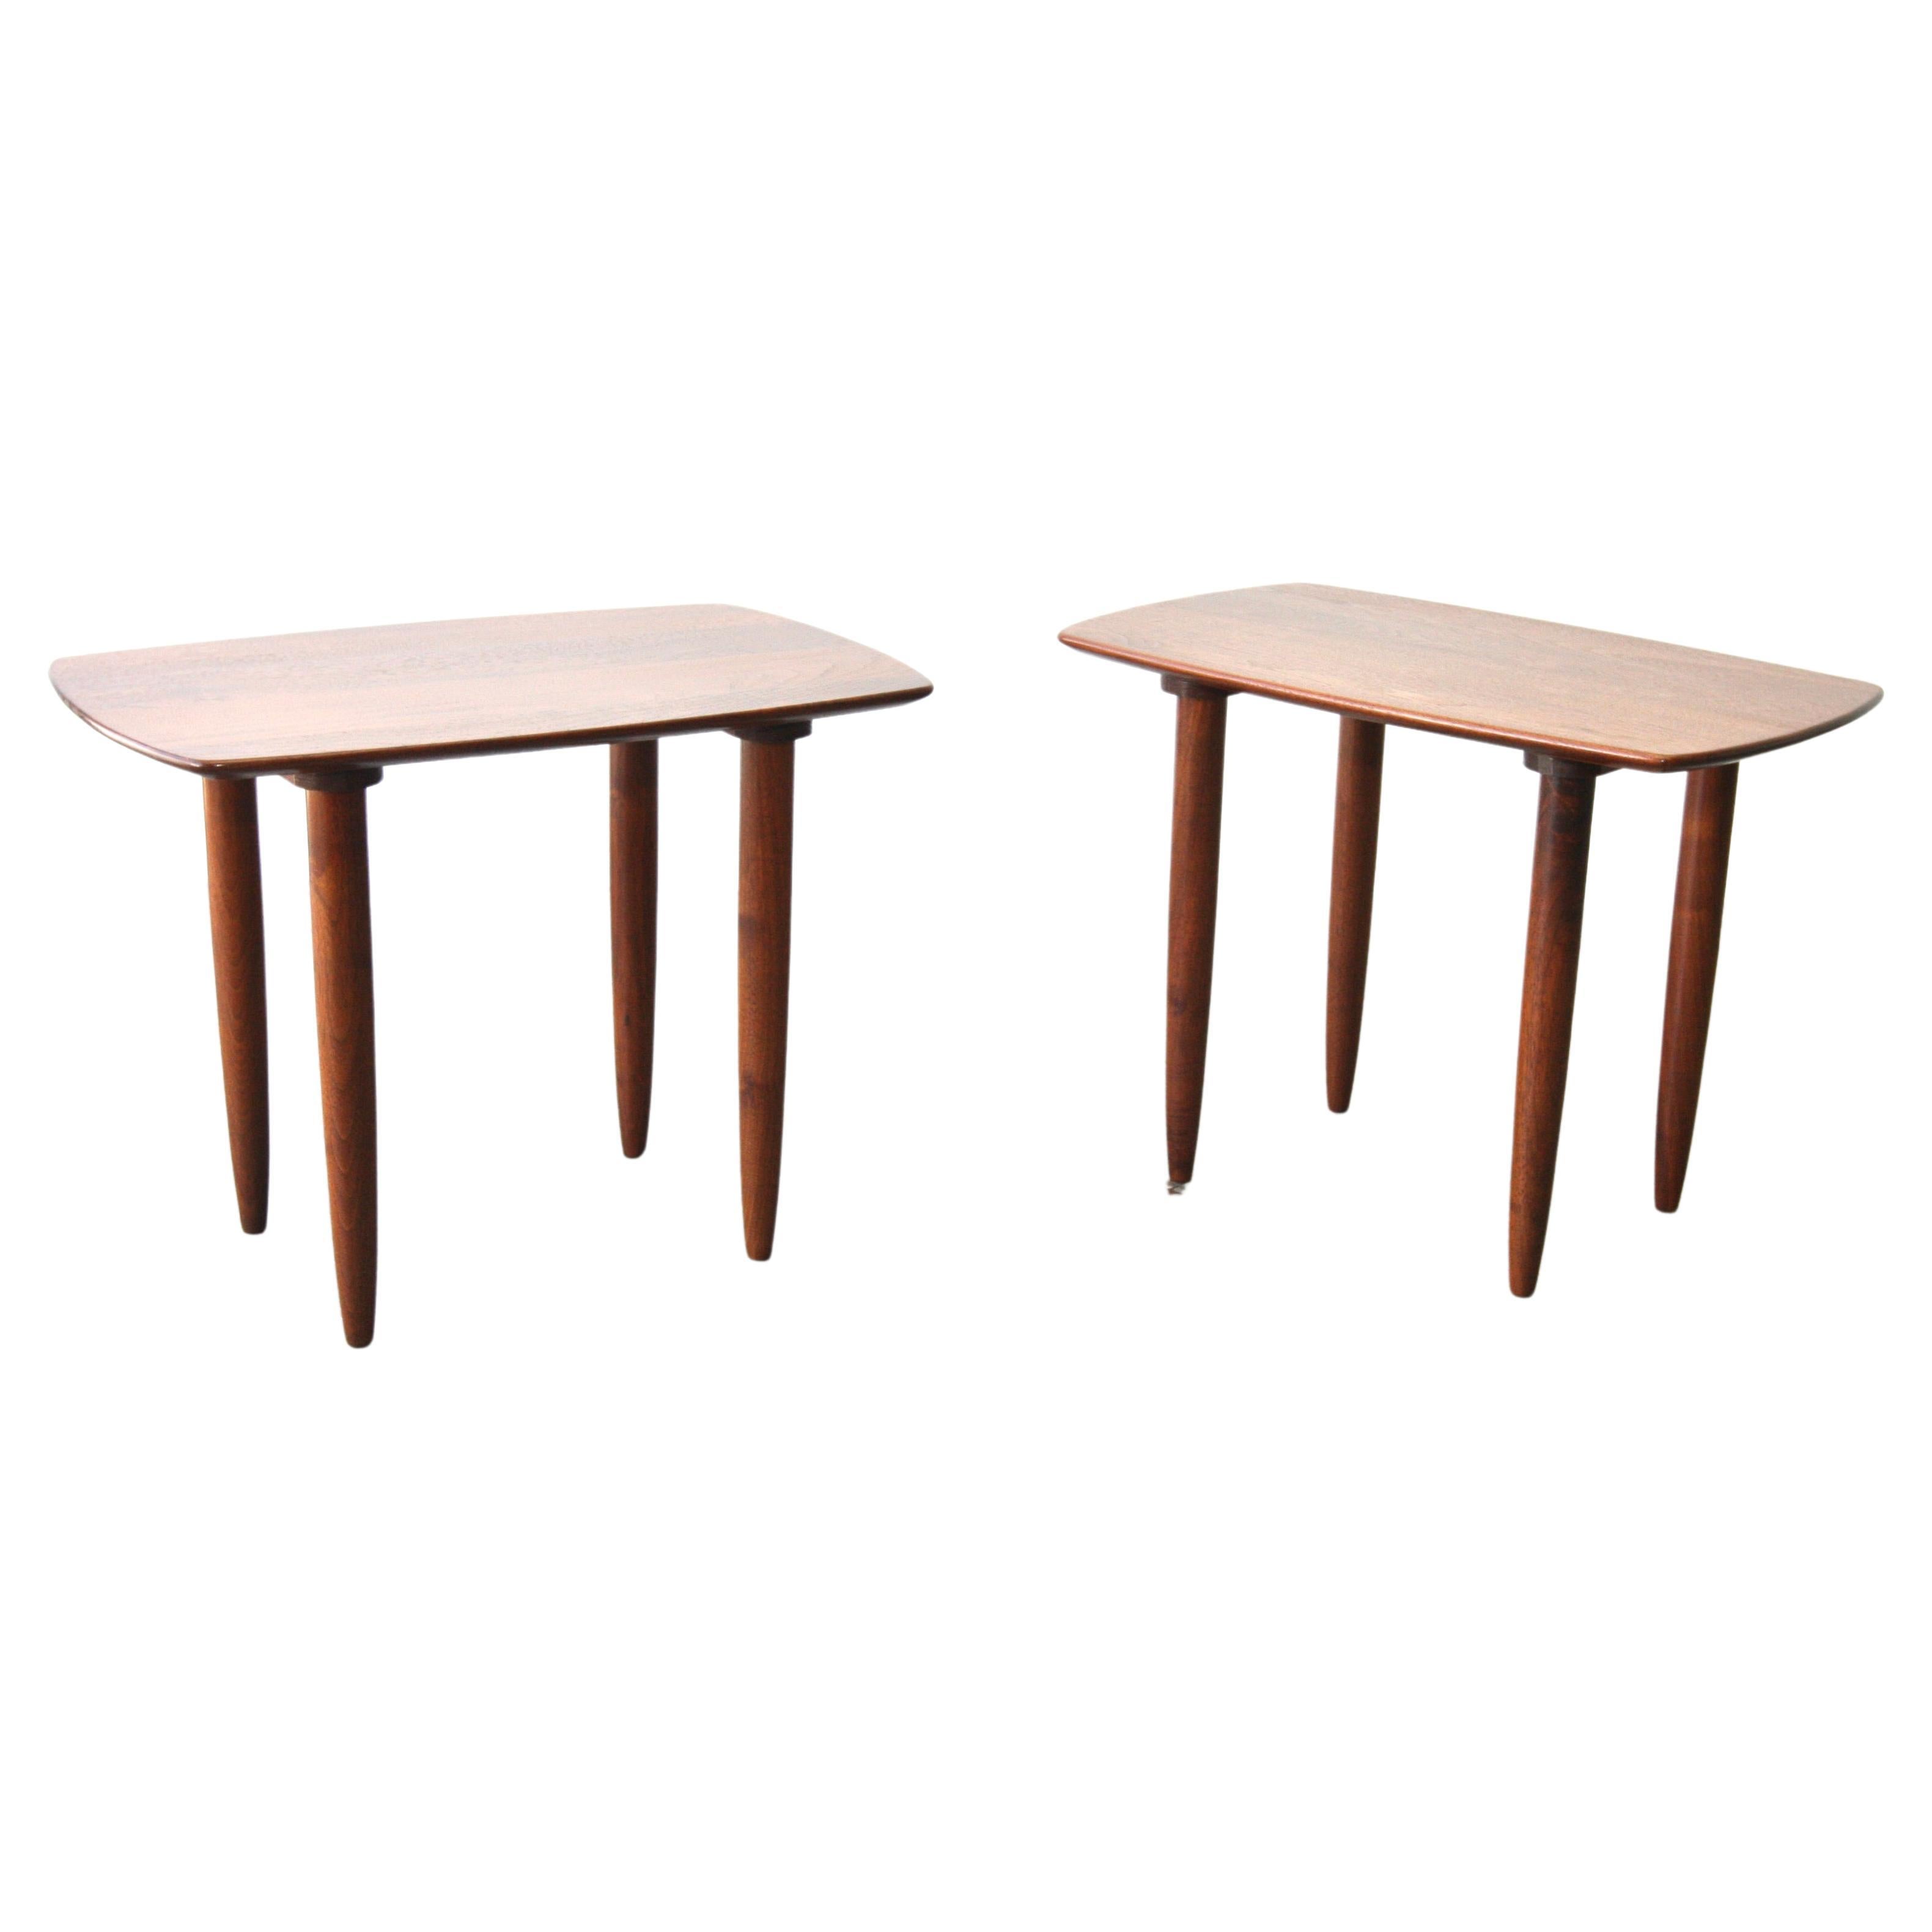 Pair of Solid Walnut Danish modern Ace side tables in the style of Peter Hivdit